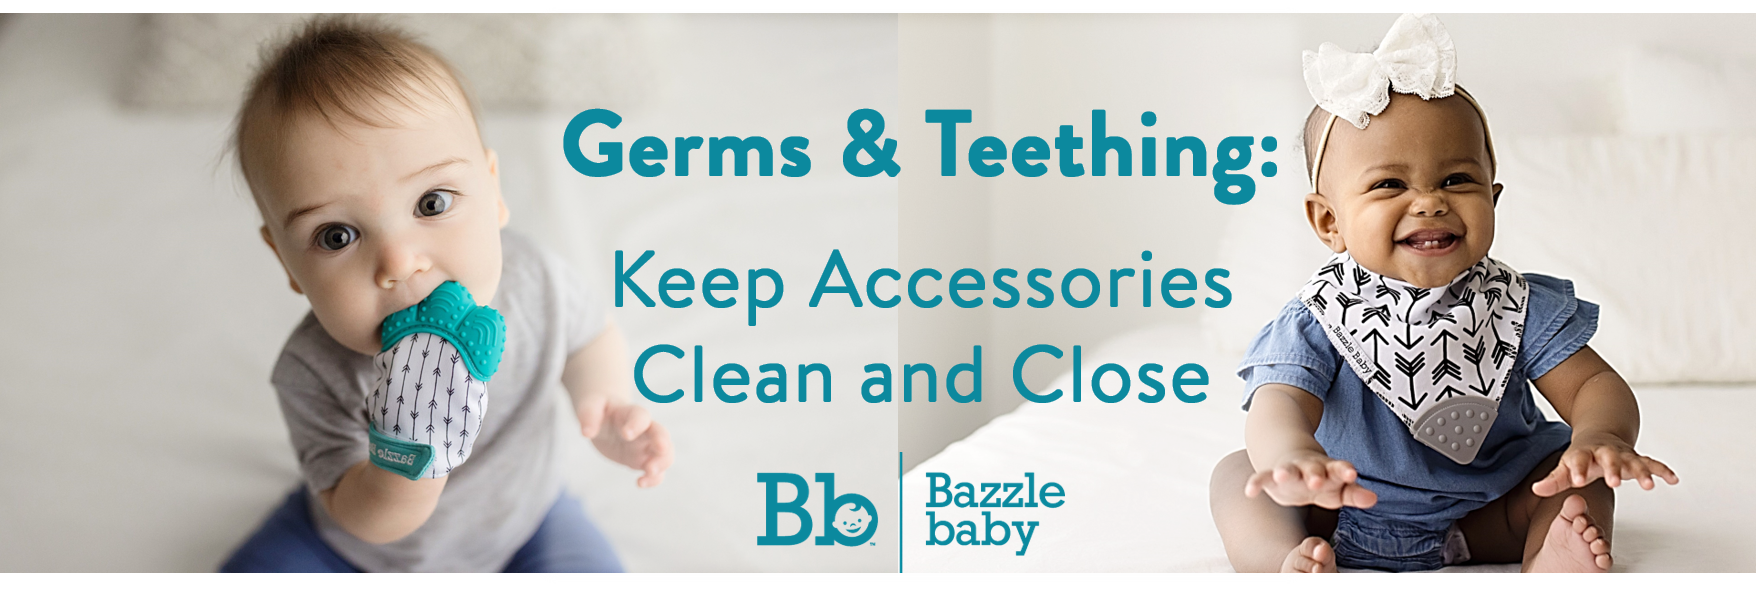 Germs & Teething: Keep Accessories Clean and Close